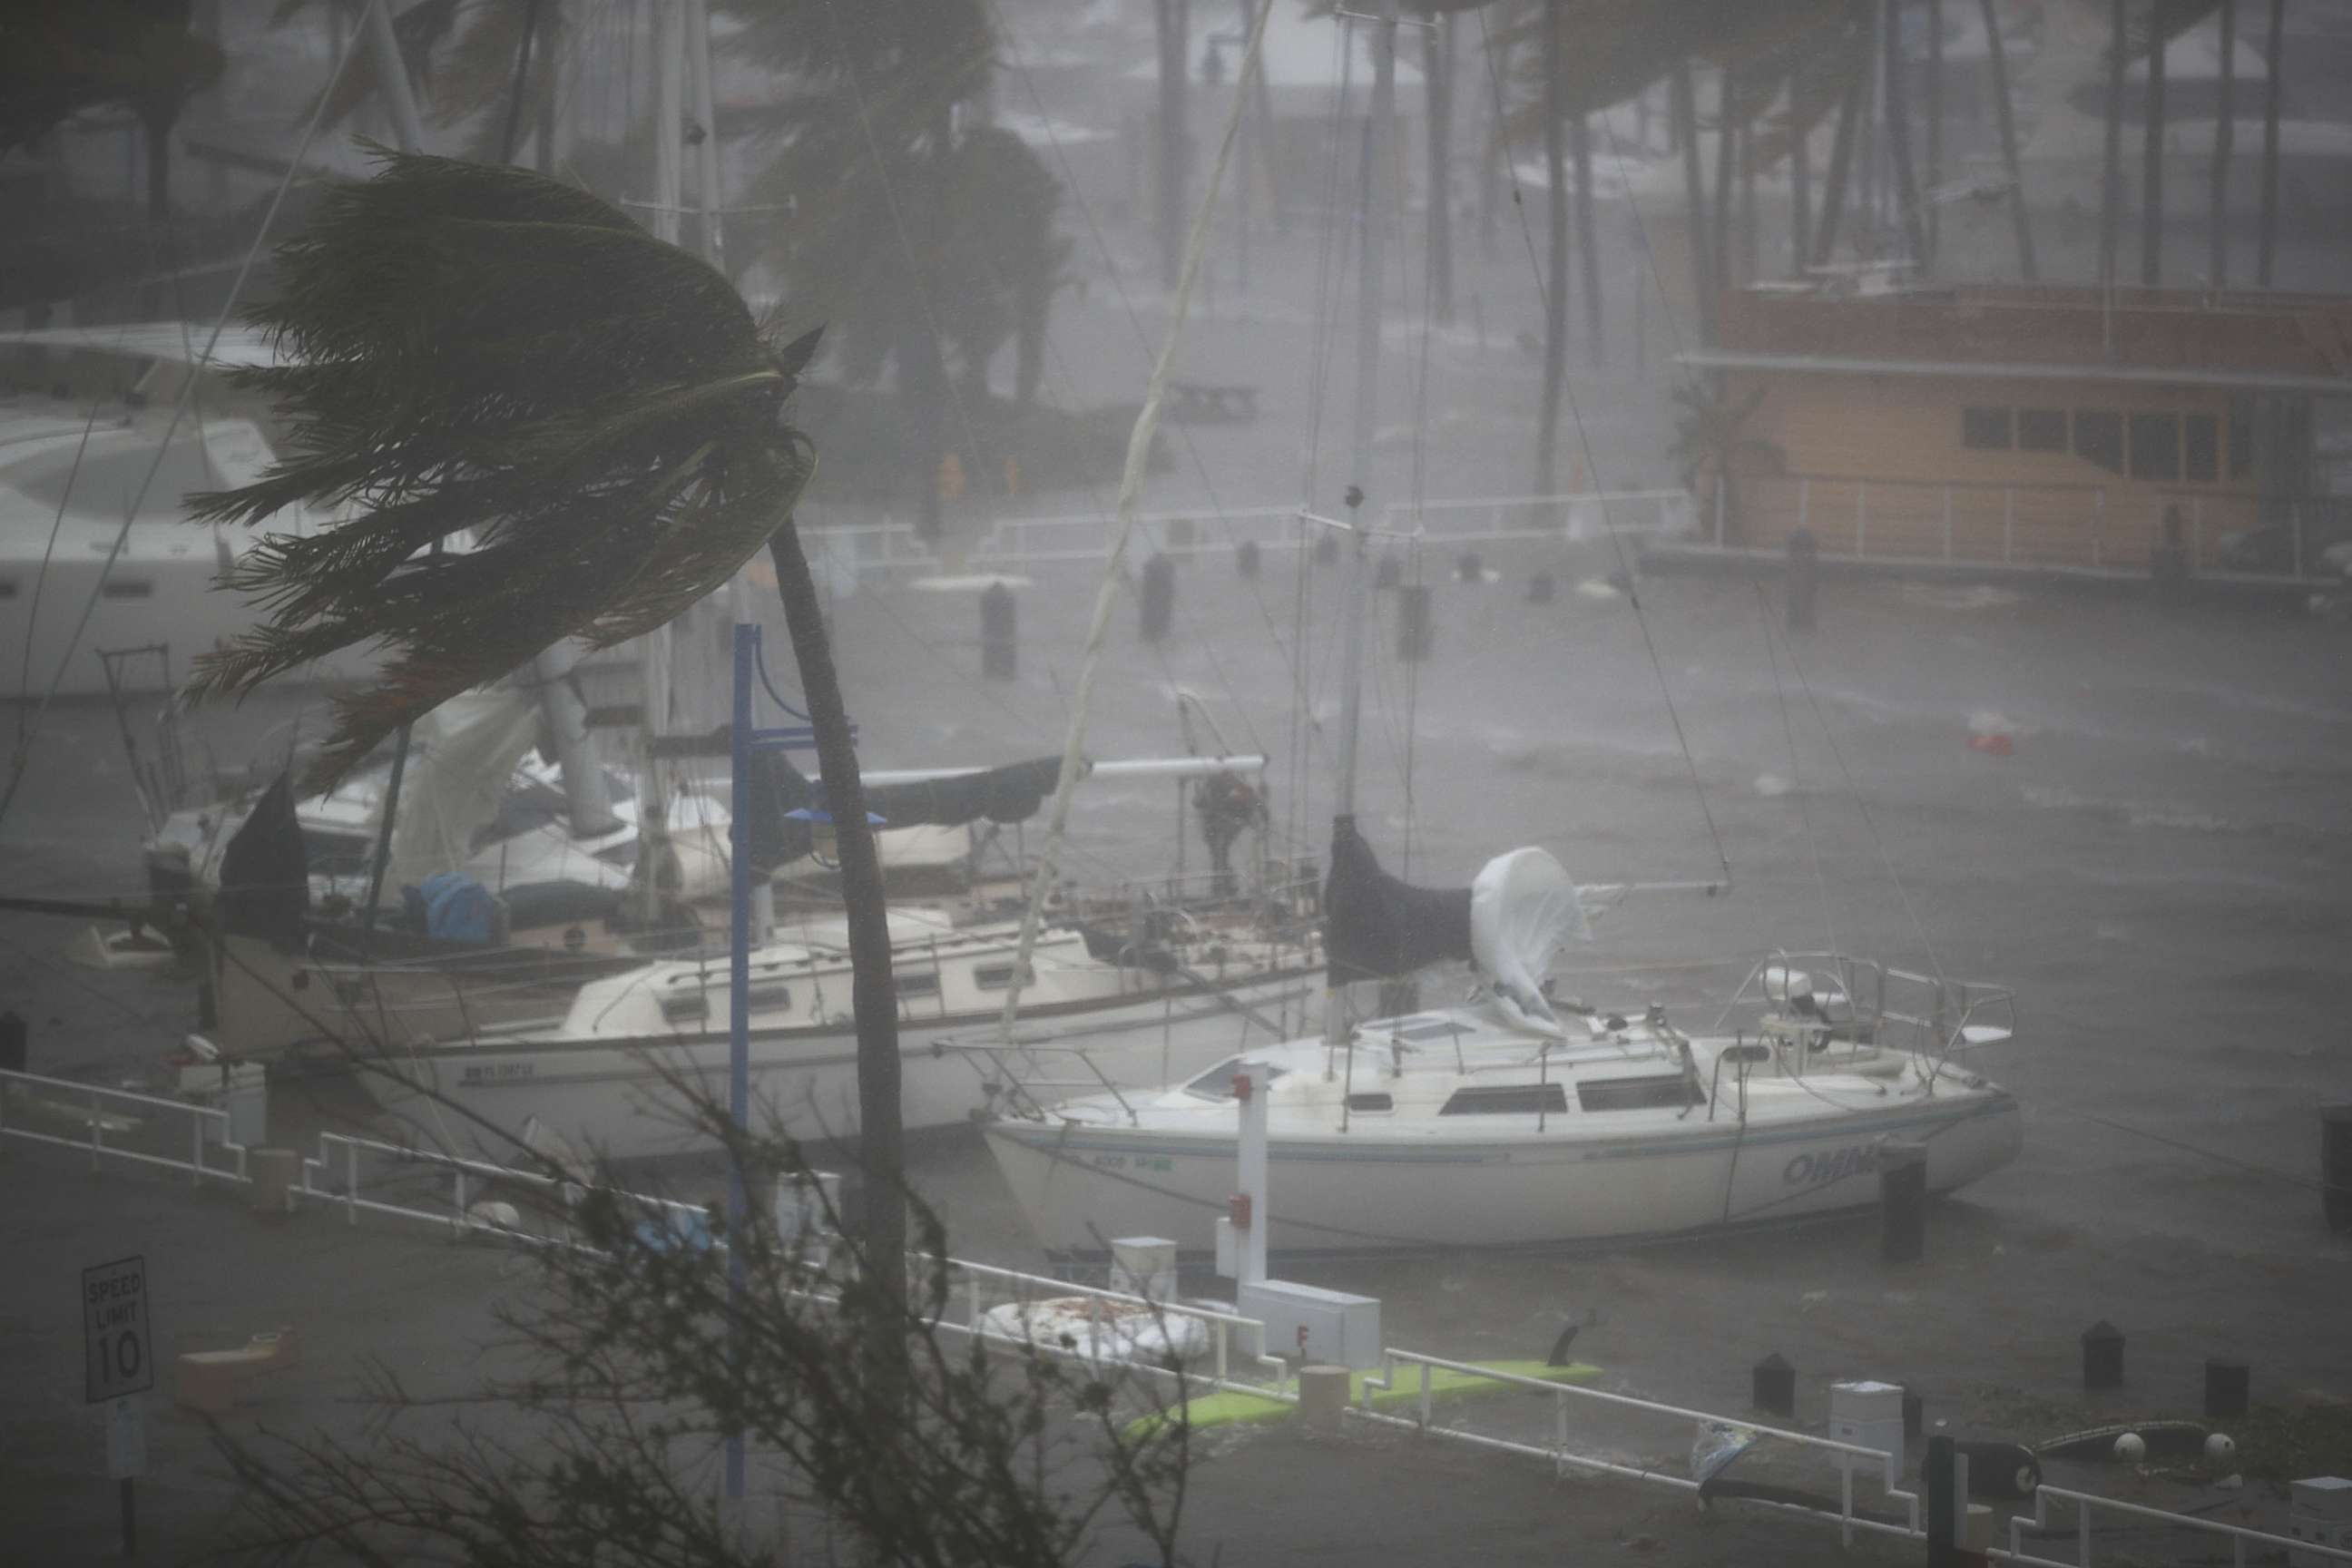 PHOTO: Boats ride out Hurricane Irma in a marina on Sept. 10, 2017 in Miami.